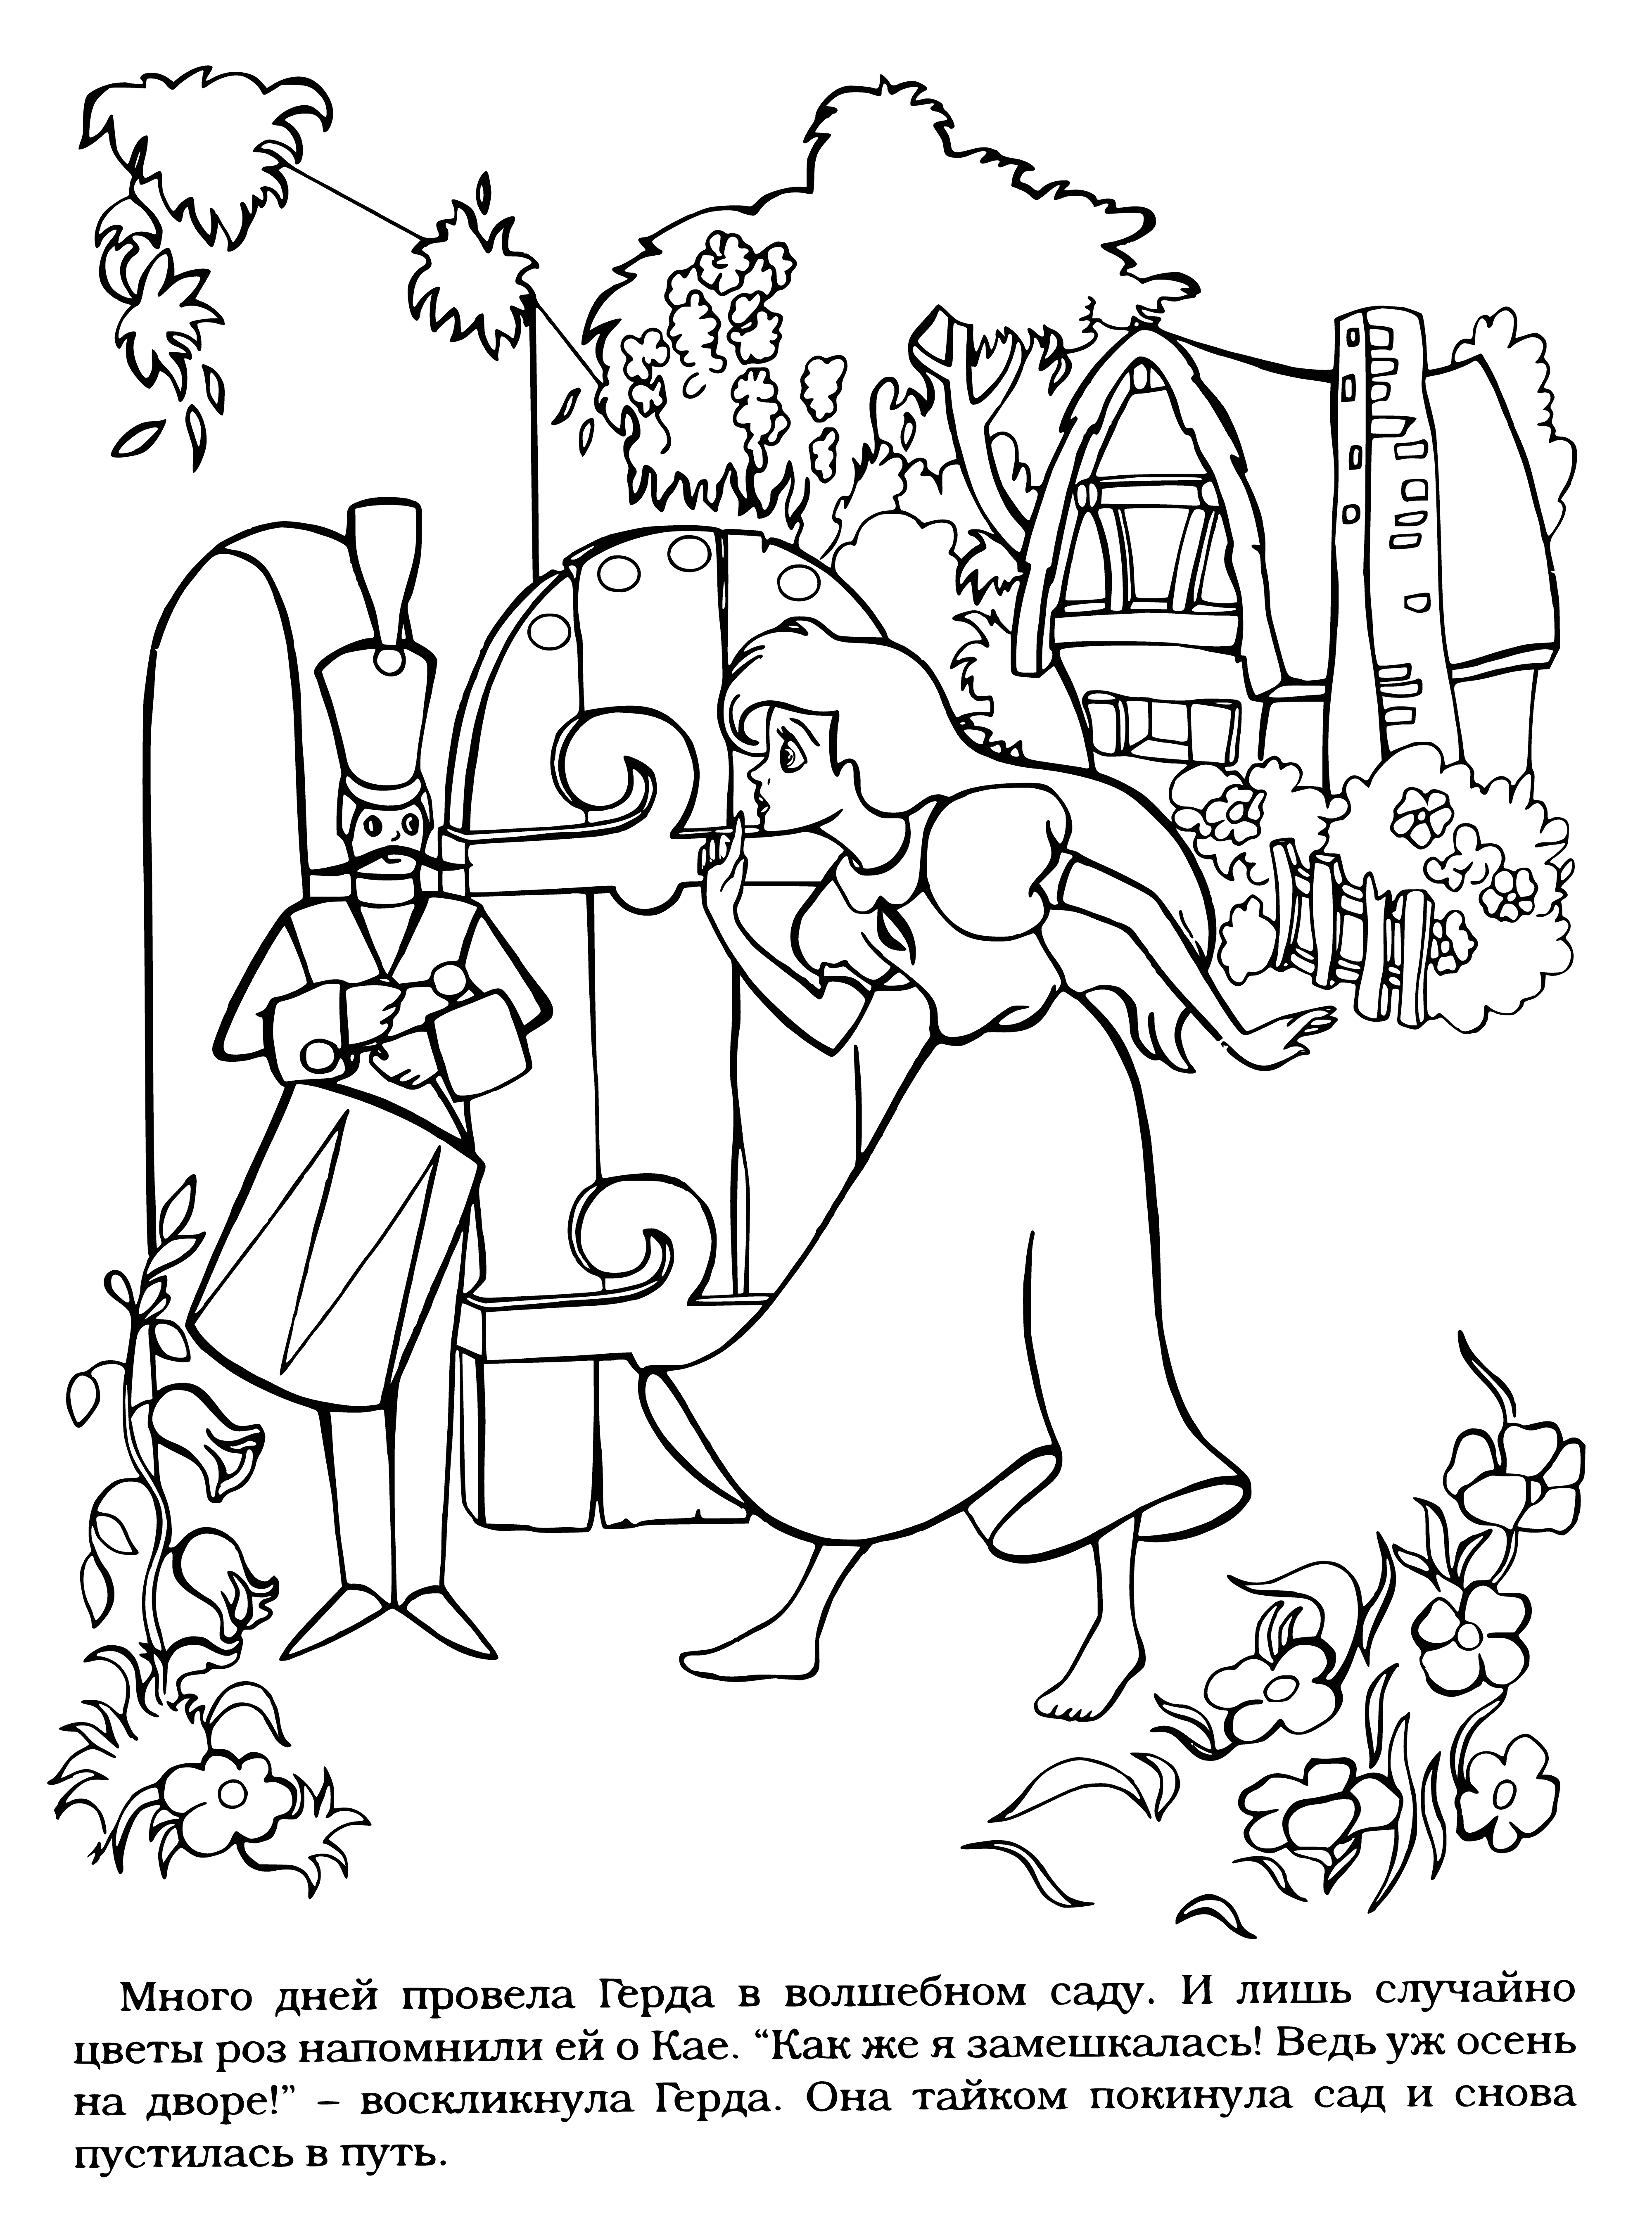 coloring page: Gerda cries by a river holding a rose and is accompanied by a fox in the snow.